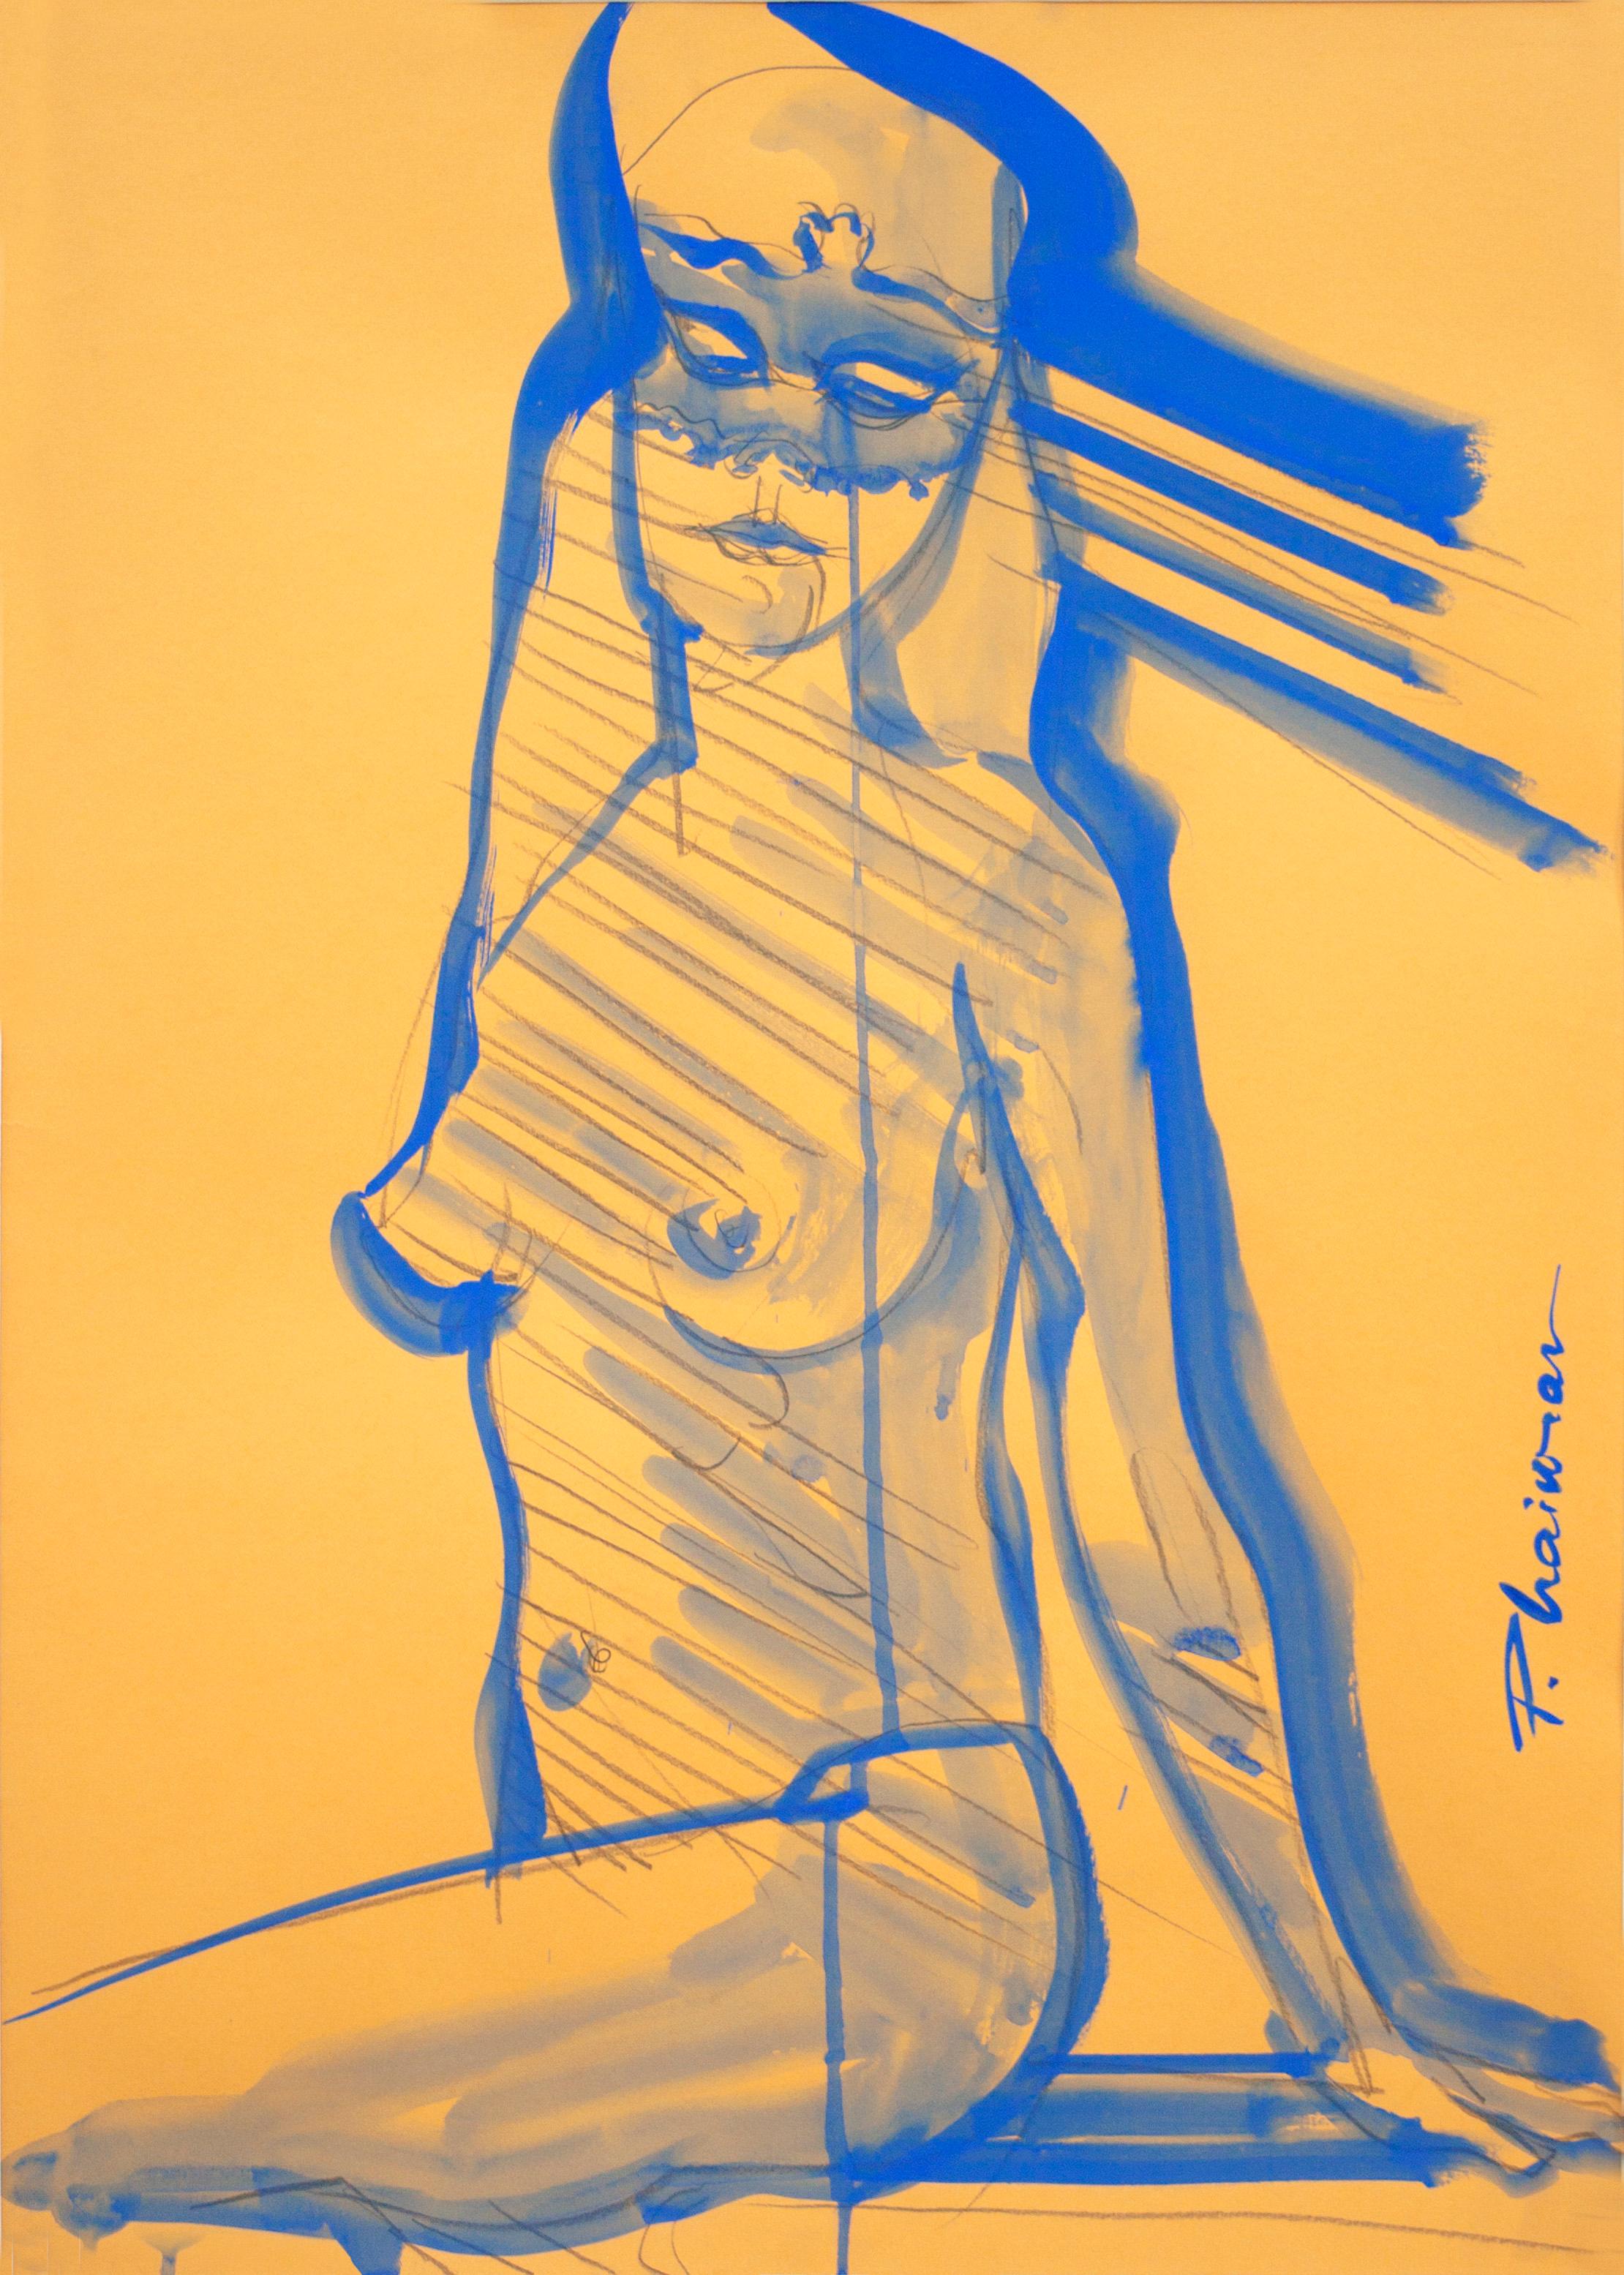 Masked 
Part of my Blue Nude series, inspired by Matisse. Ultramarine tempera on paper.
Masked Nude was part of solo show "Nude in Interior" see pictures.
Shipped rolled in a tube, directly from the artist's studio. Shipping anywhere in the world.